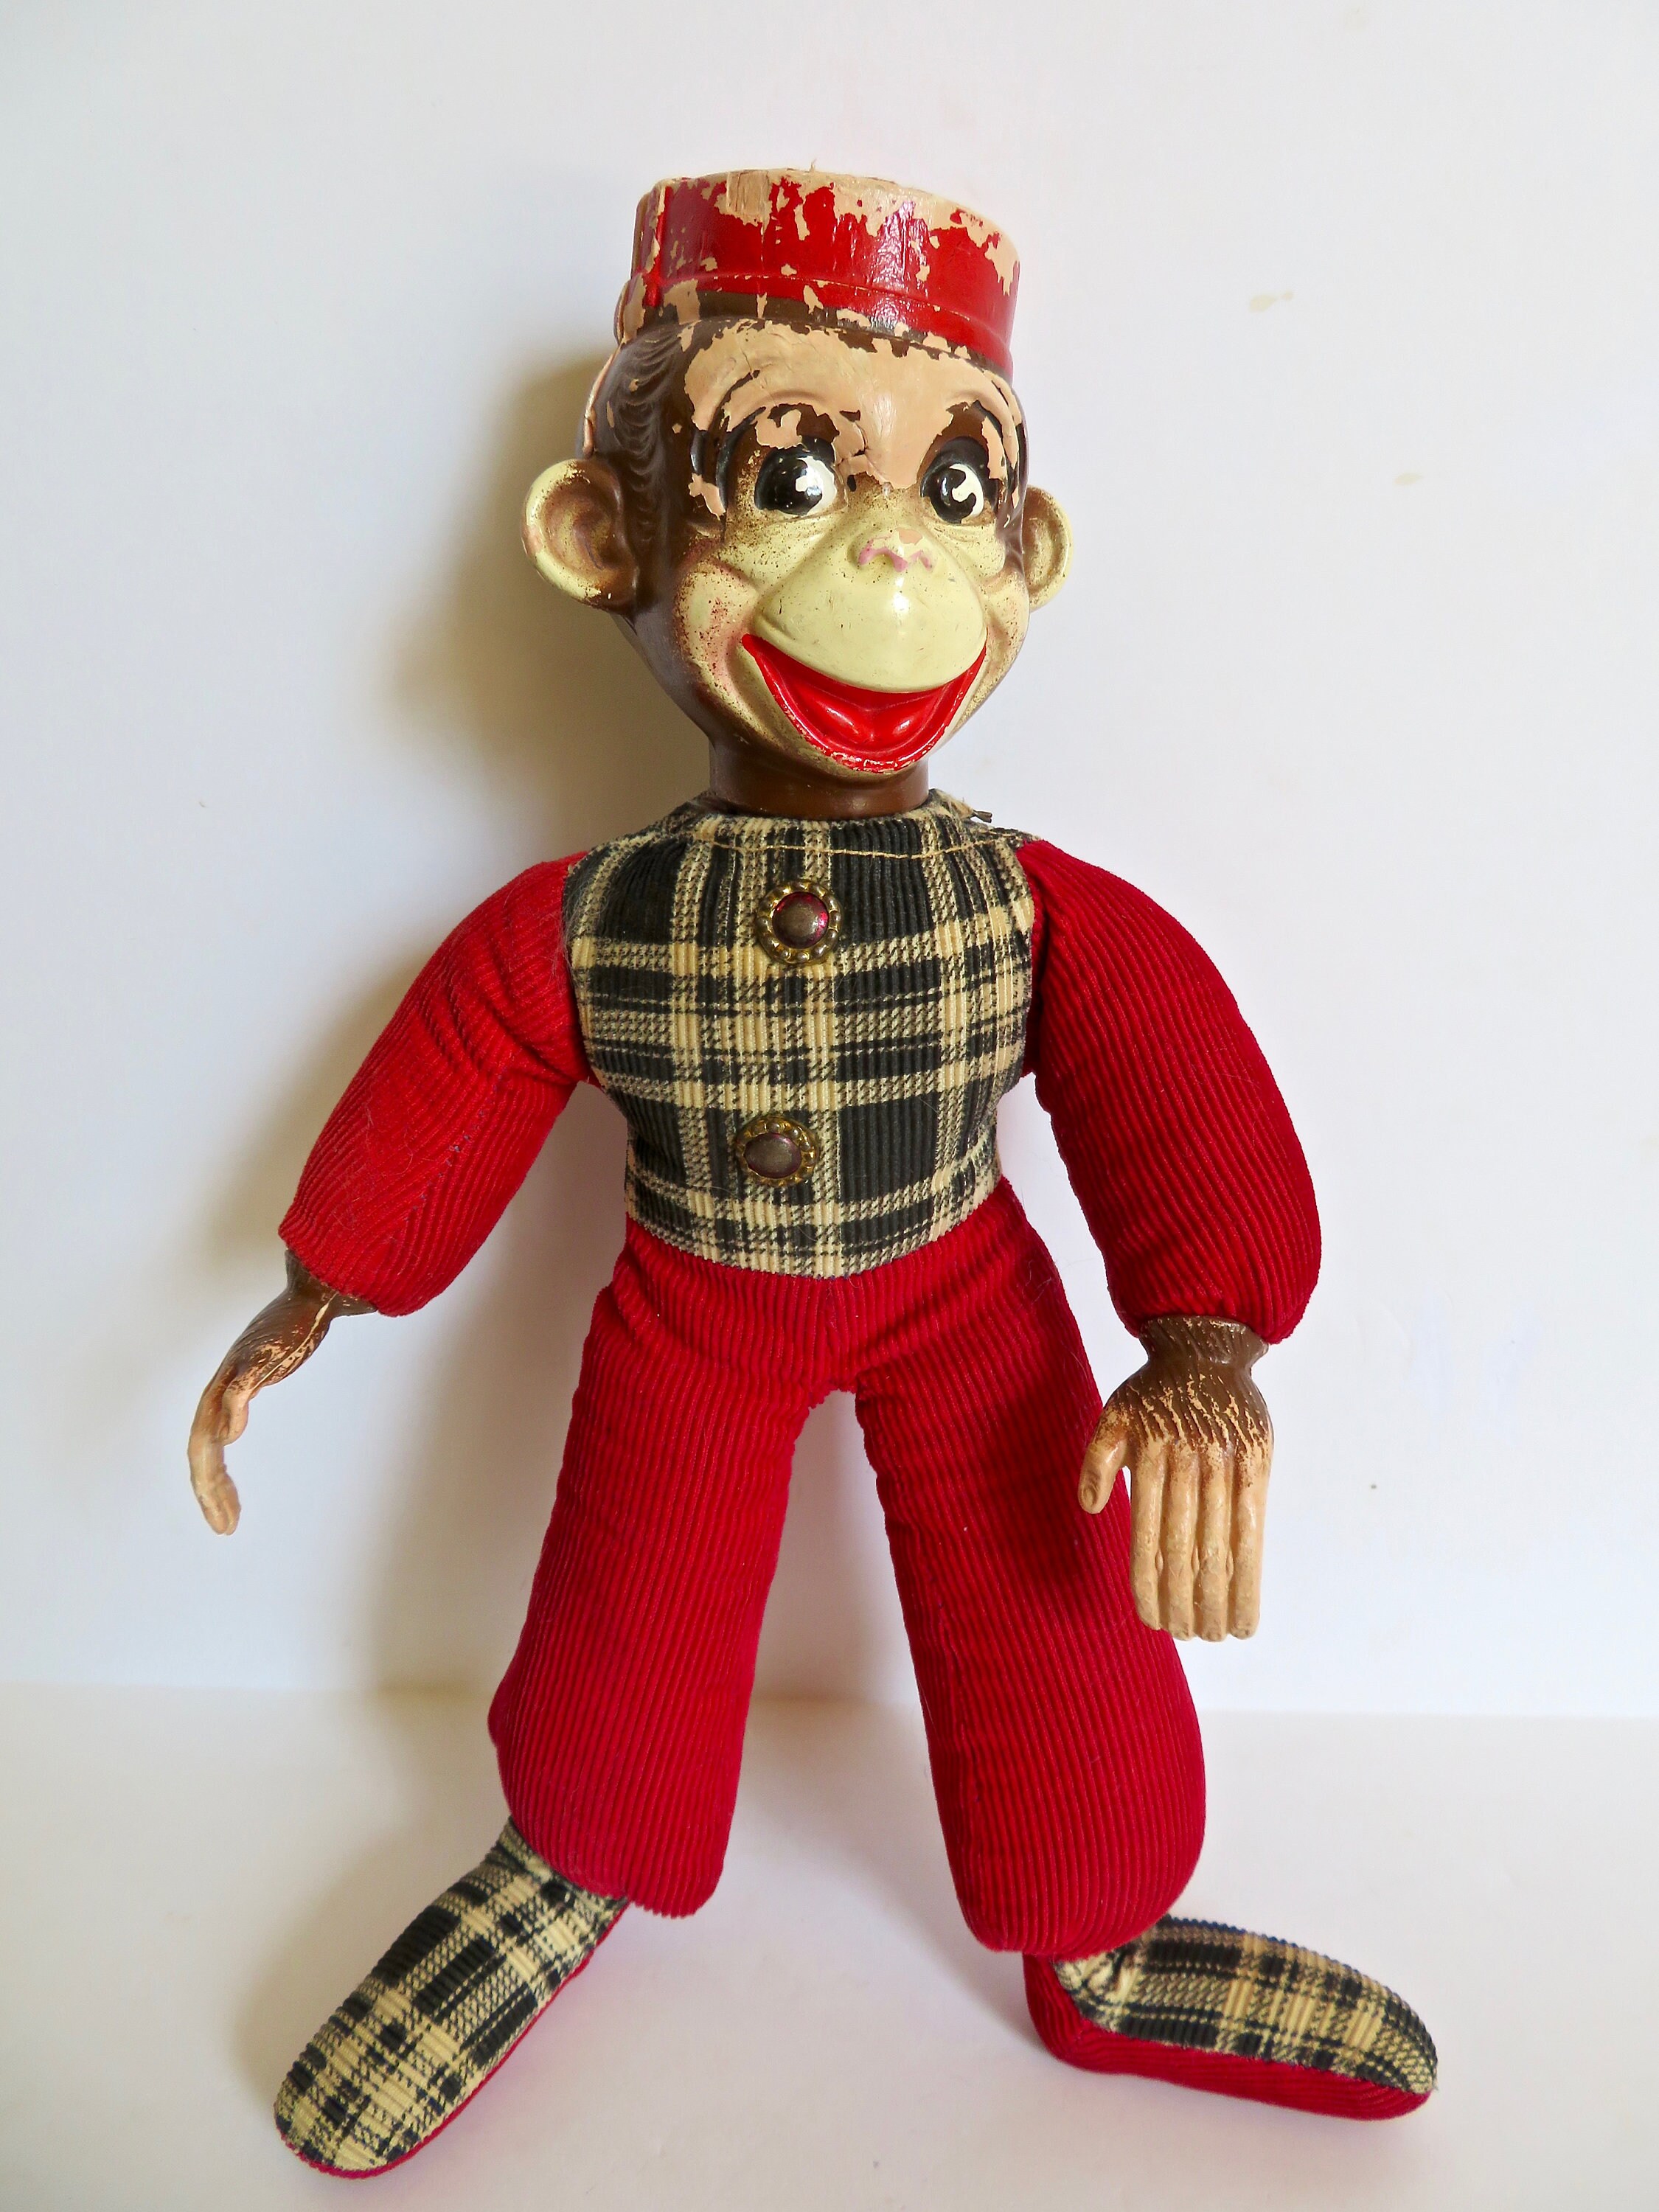 Vintage 30s 40s Bellhop Monkey Toy in Corduroy with Celluloid Plastic Face Soft Body Vintage Buttons Organ Grinder Stuffed Animal Plush